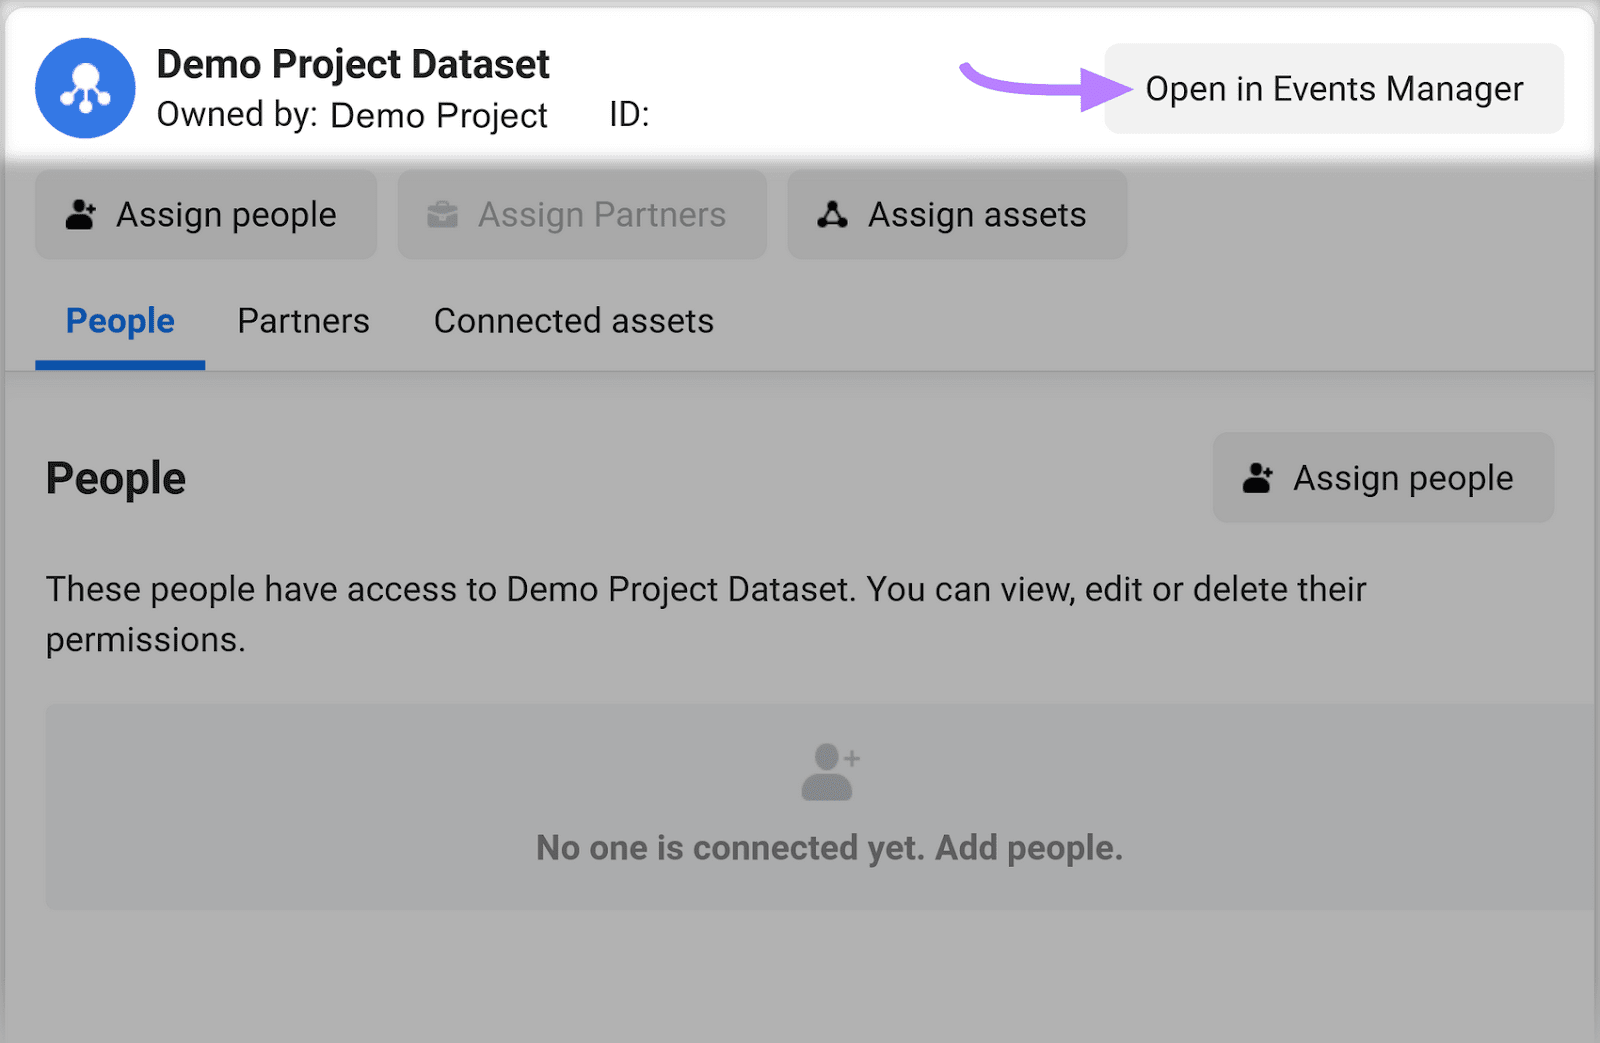 “Open in Events Manager” button highlighted next to the "Demo Project Dataset"